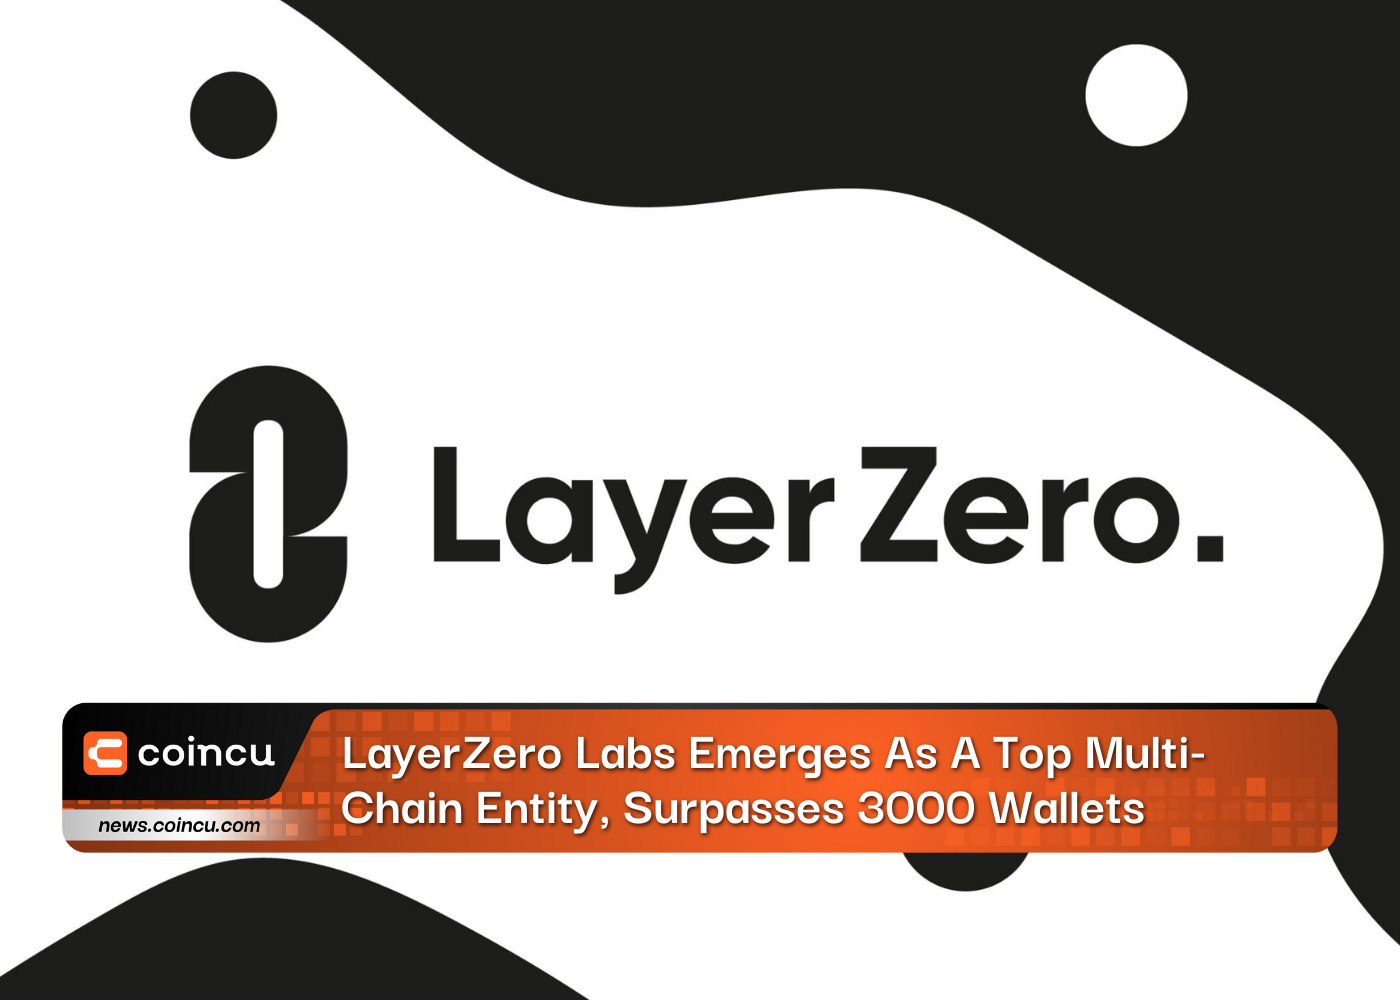 LayerZero Labs Emerges As A Top Multi-Chain Entity, Surpasses 3000 Wallets